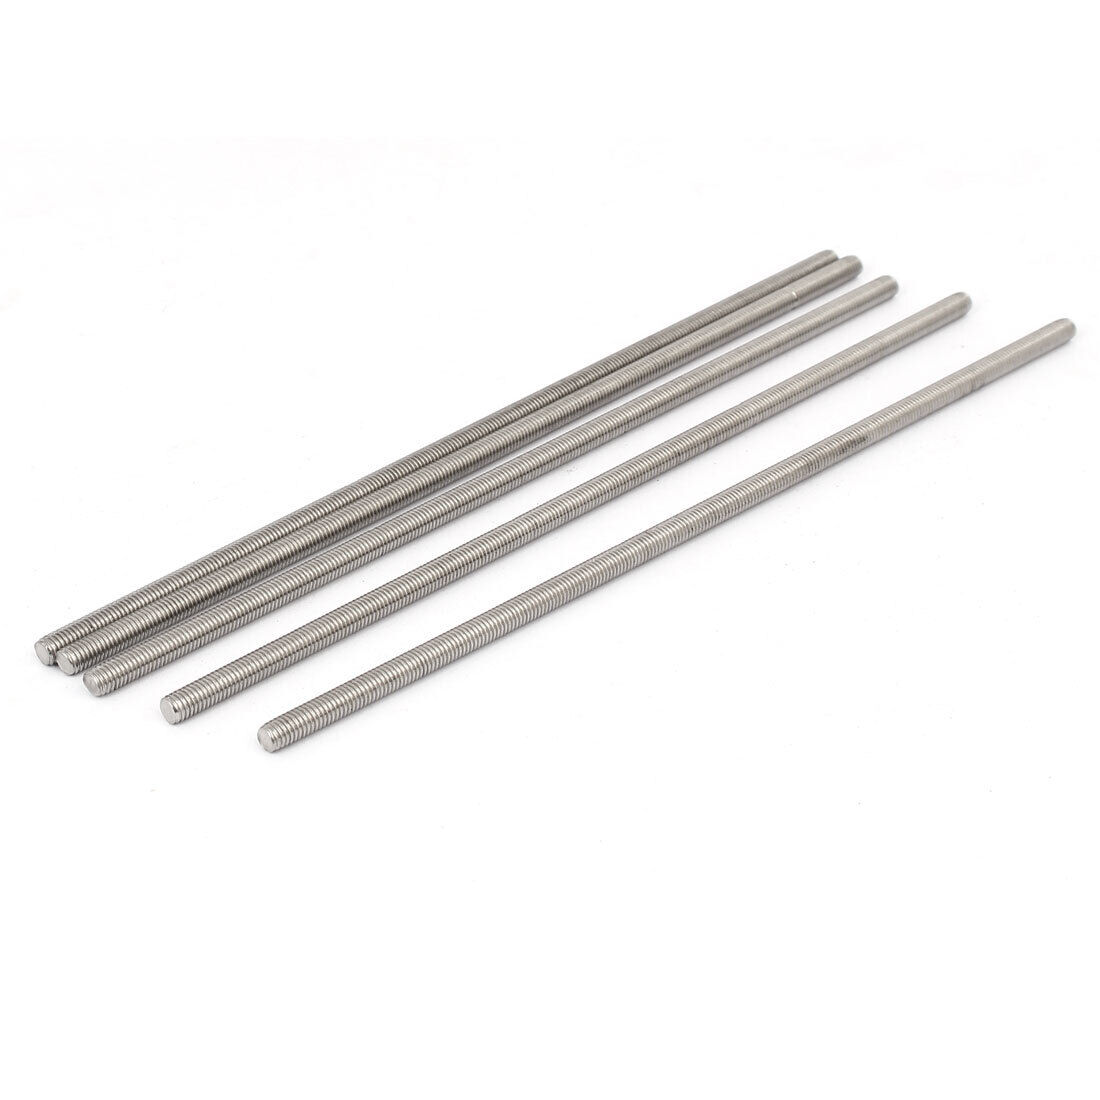 5pcs M5 x 190mm 304 Stainless Steel Fully Threaded Rod Bar Studs Fasteners